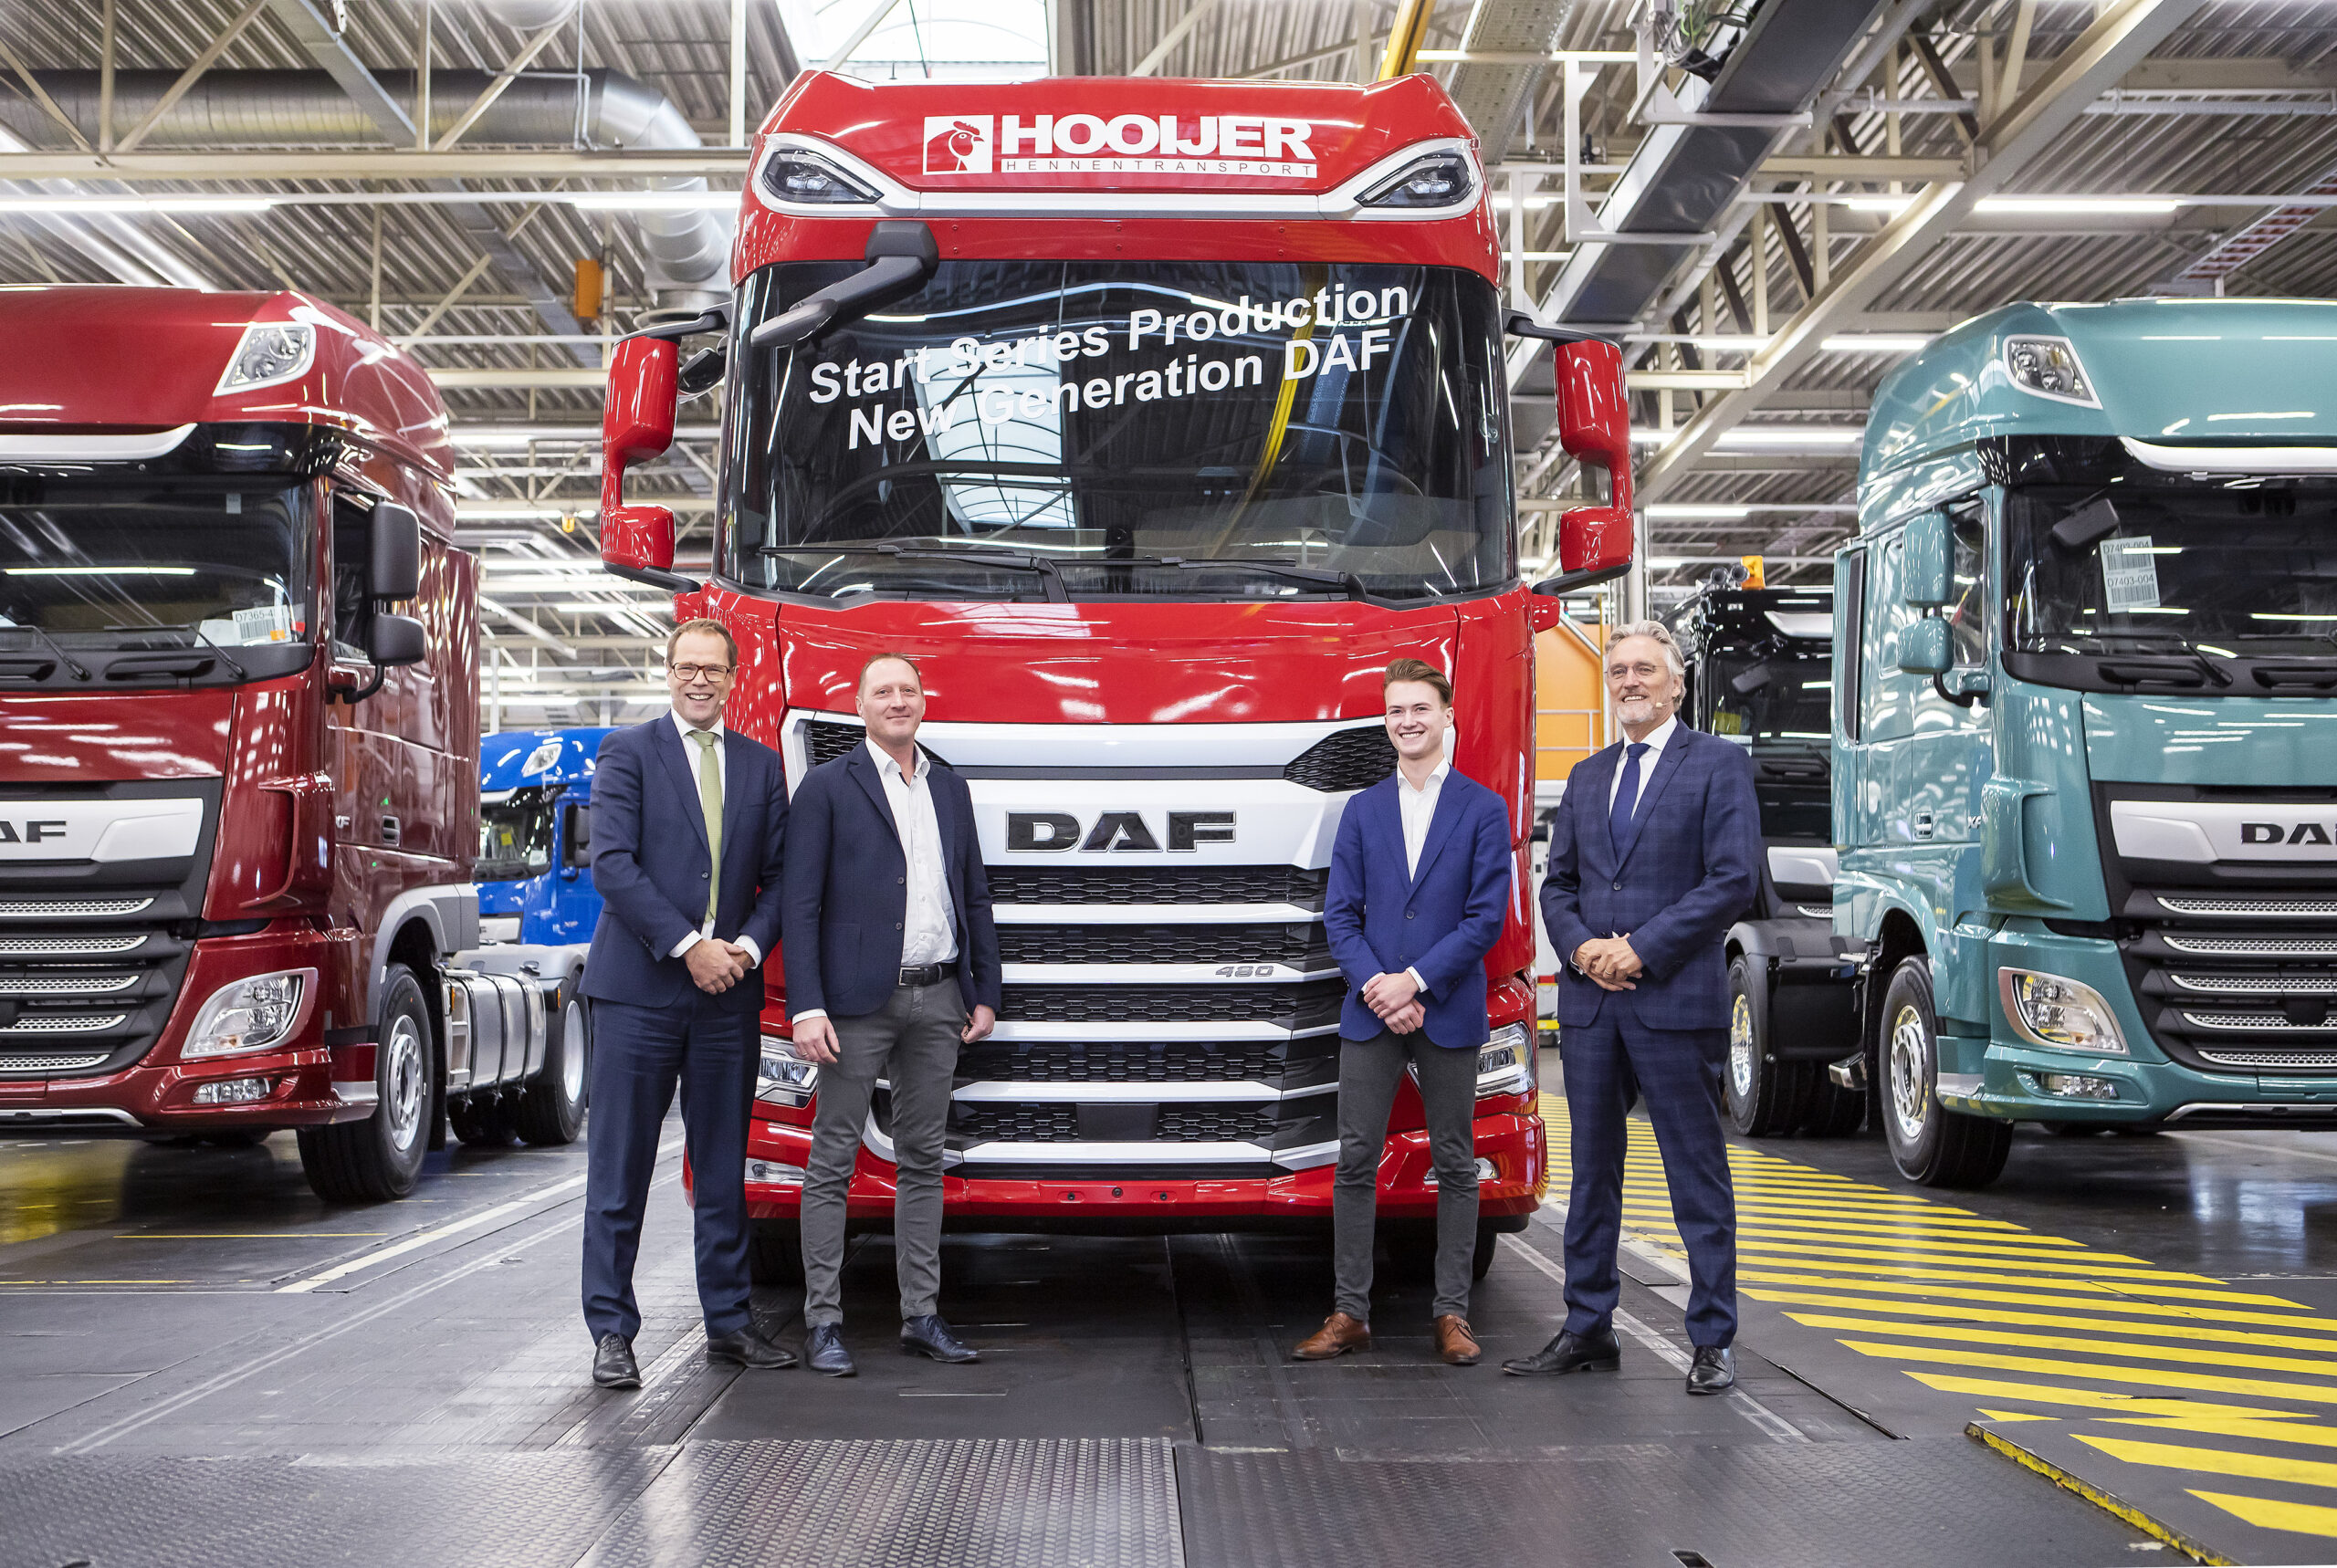 DAF to Start Production a New Genertion of Trucks